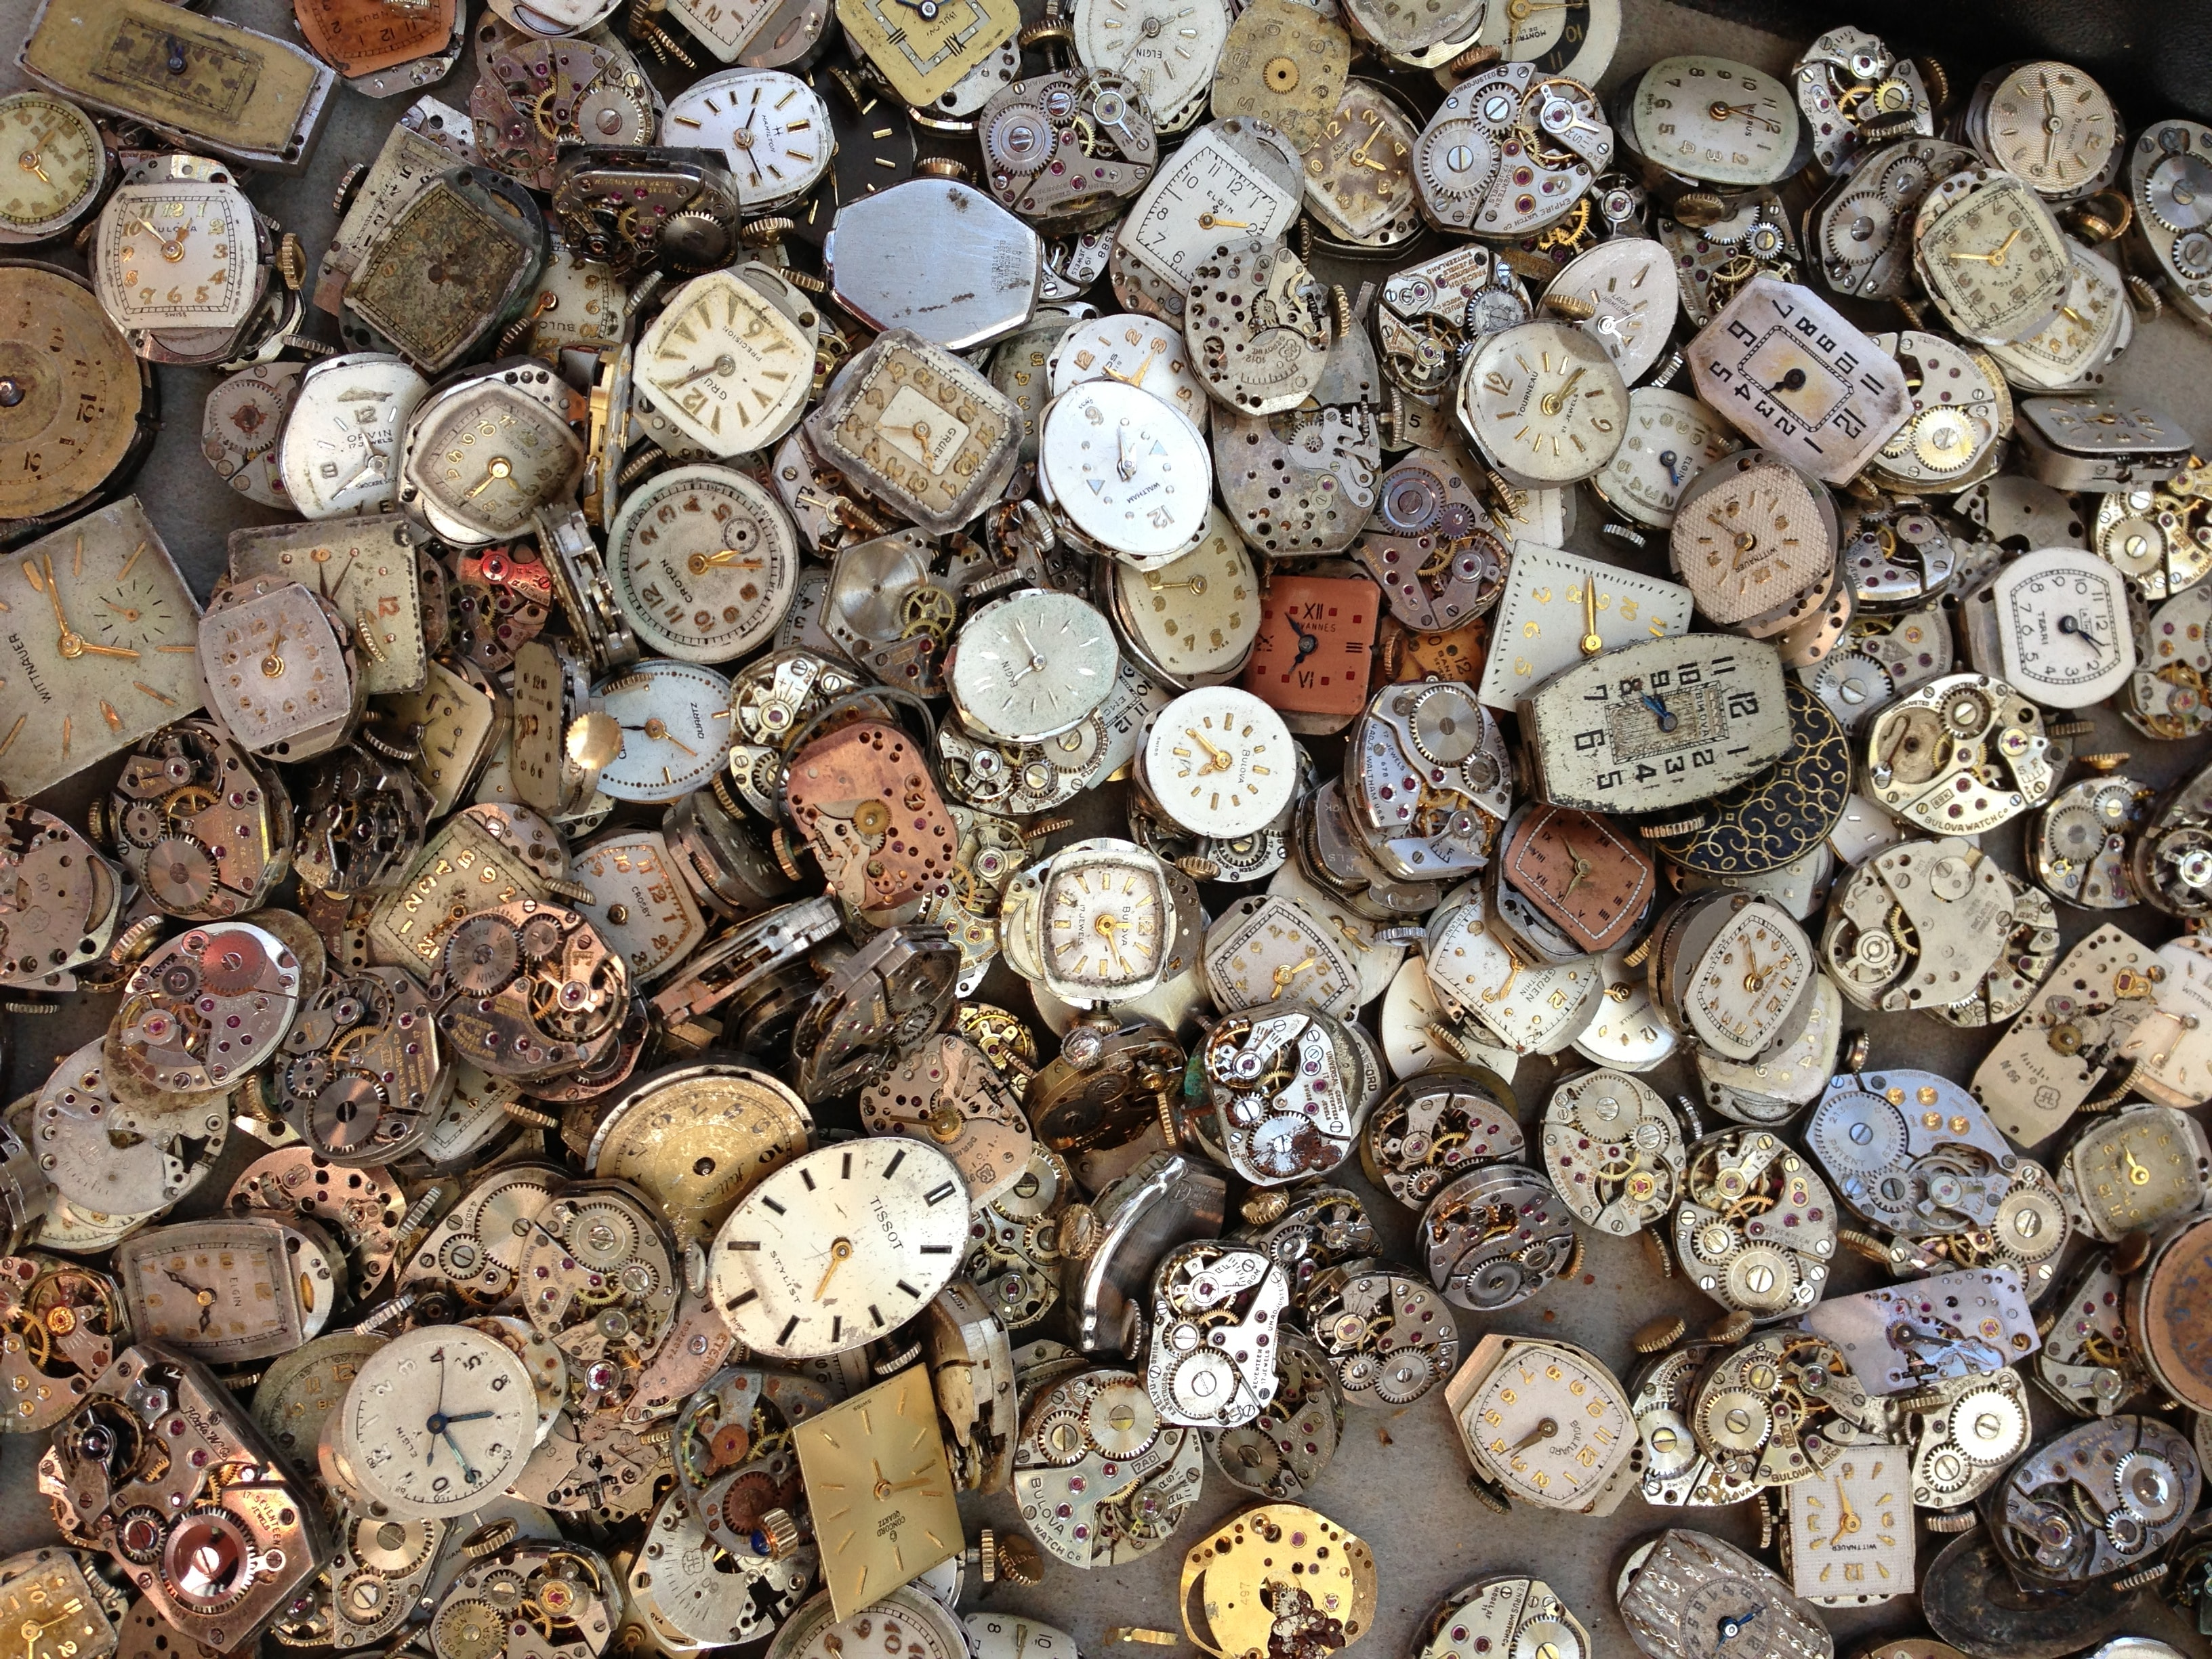 A watchmaker's discard pile of old watches.